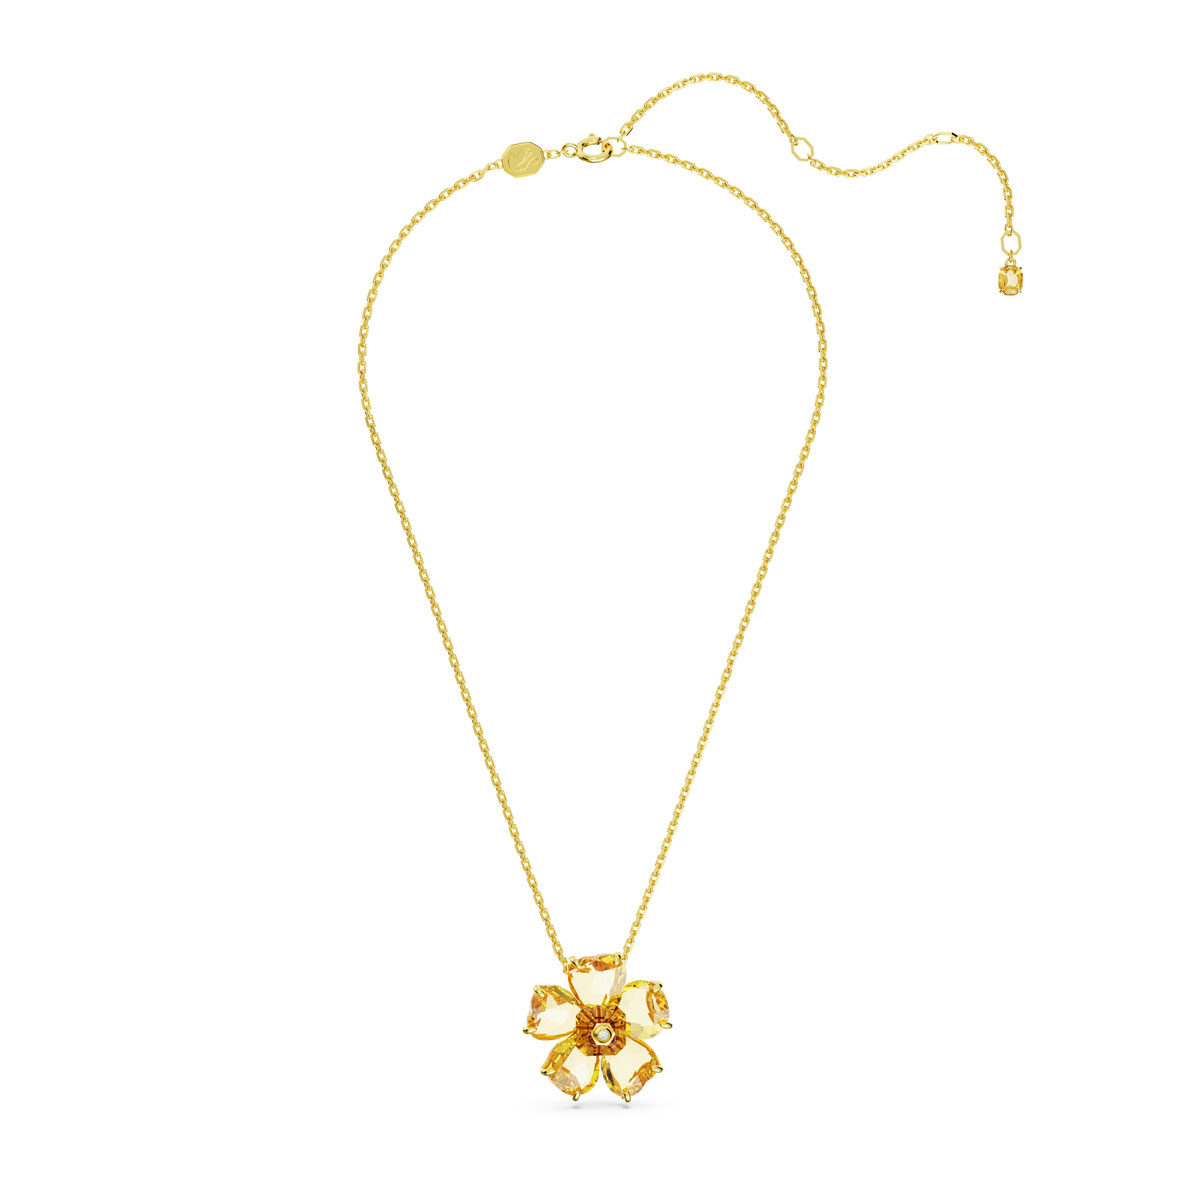 Swarovski Yellow Crystal and Gold Florere Flower Pendant Necklace